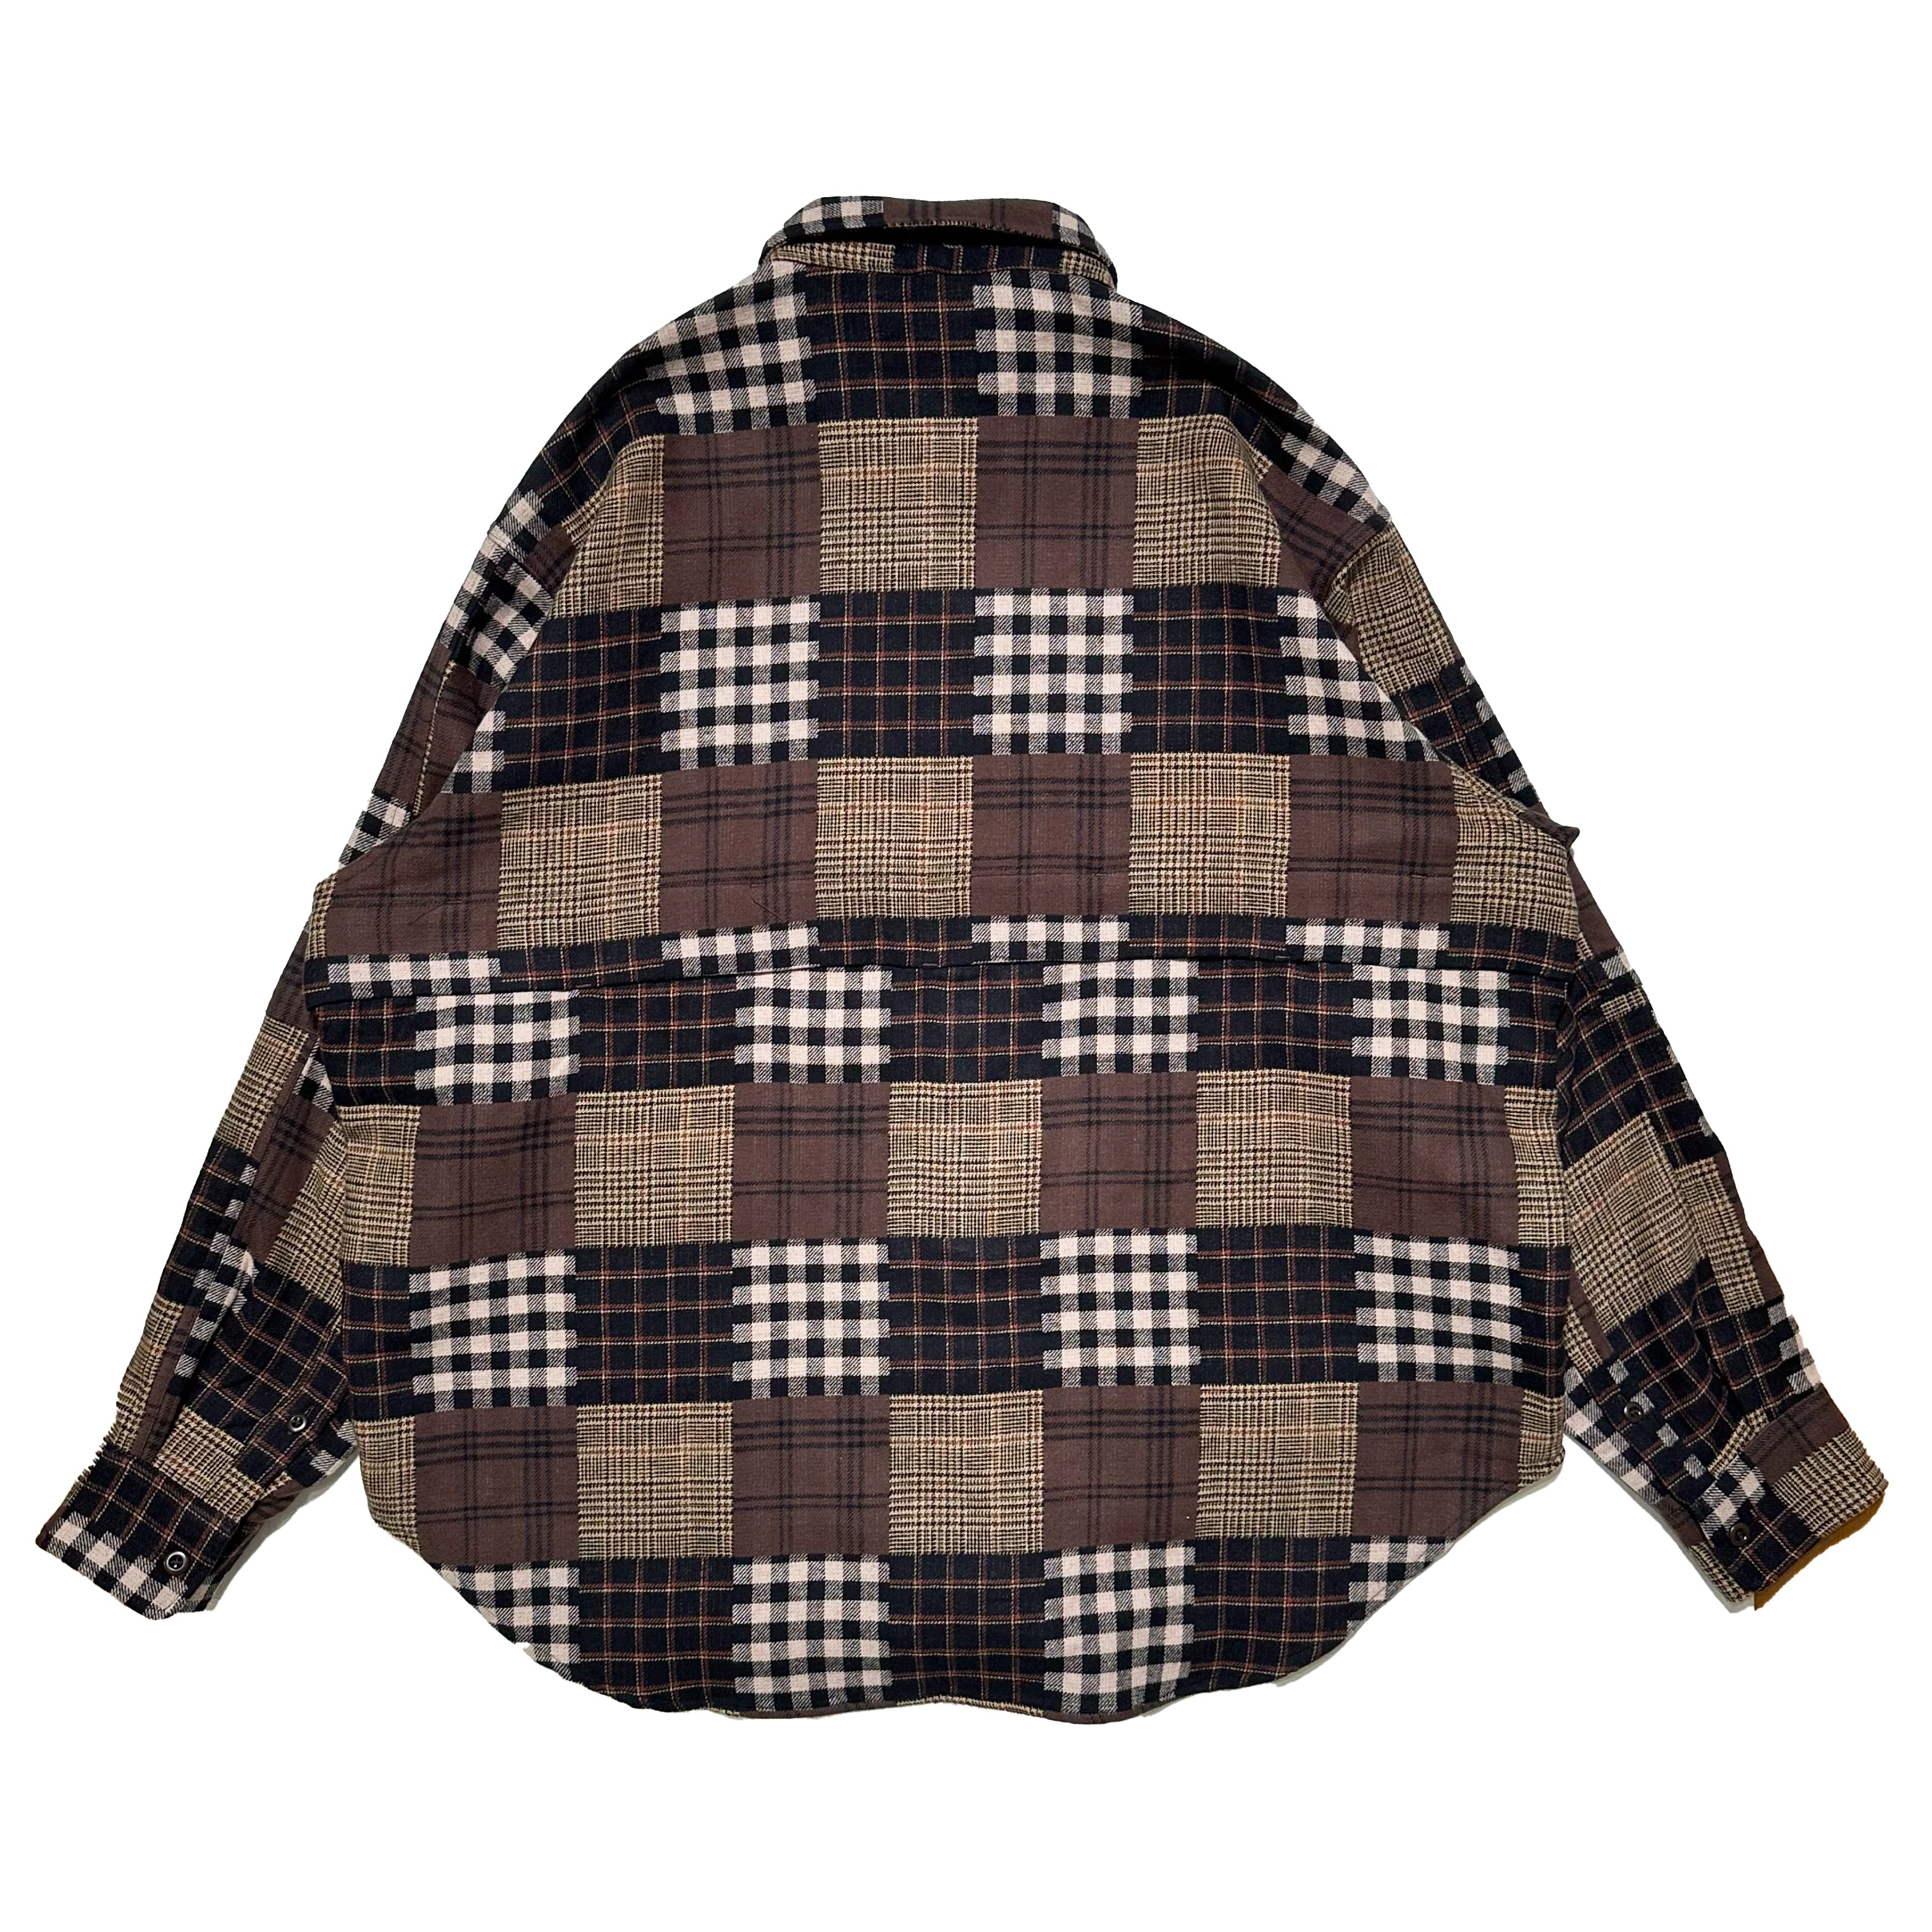 ALWAYS OUT OF STOCK / CHECK CPO JACKET